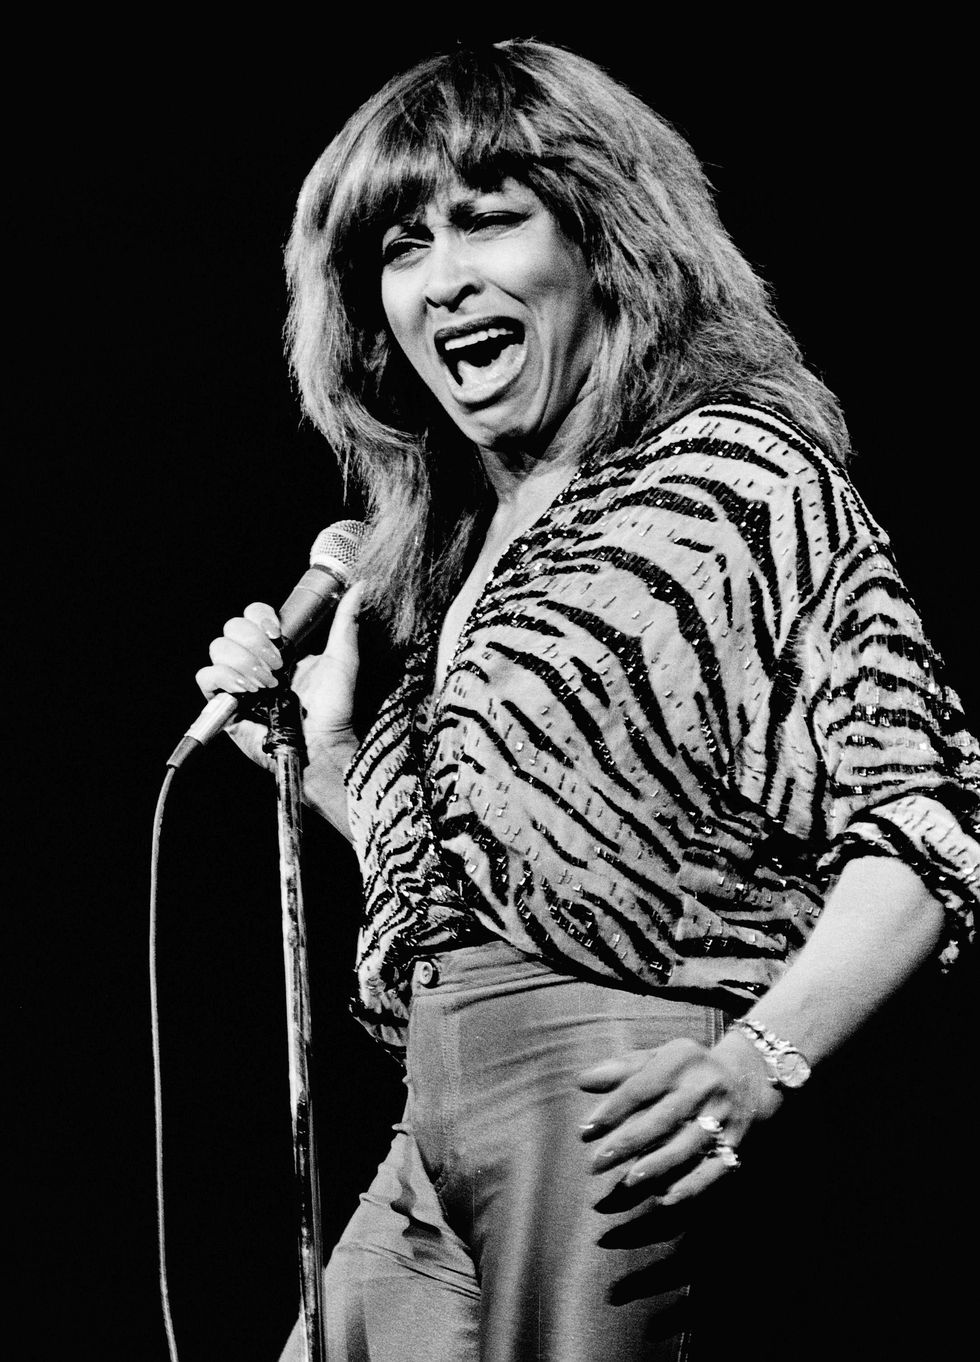 tina turner sings as she grips a microphone on a stand with one hand